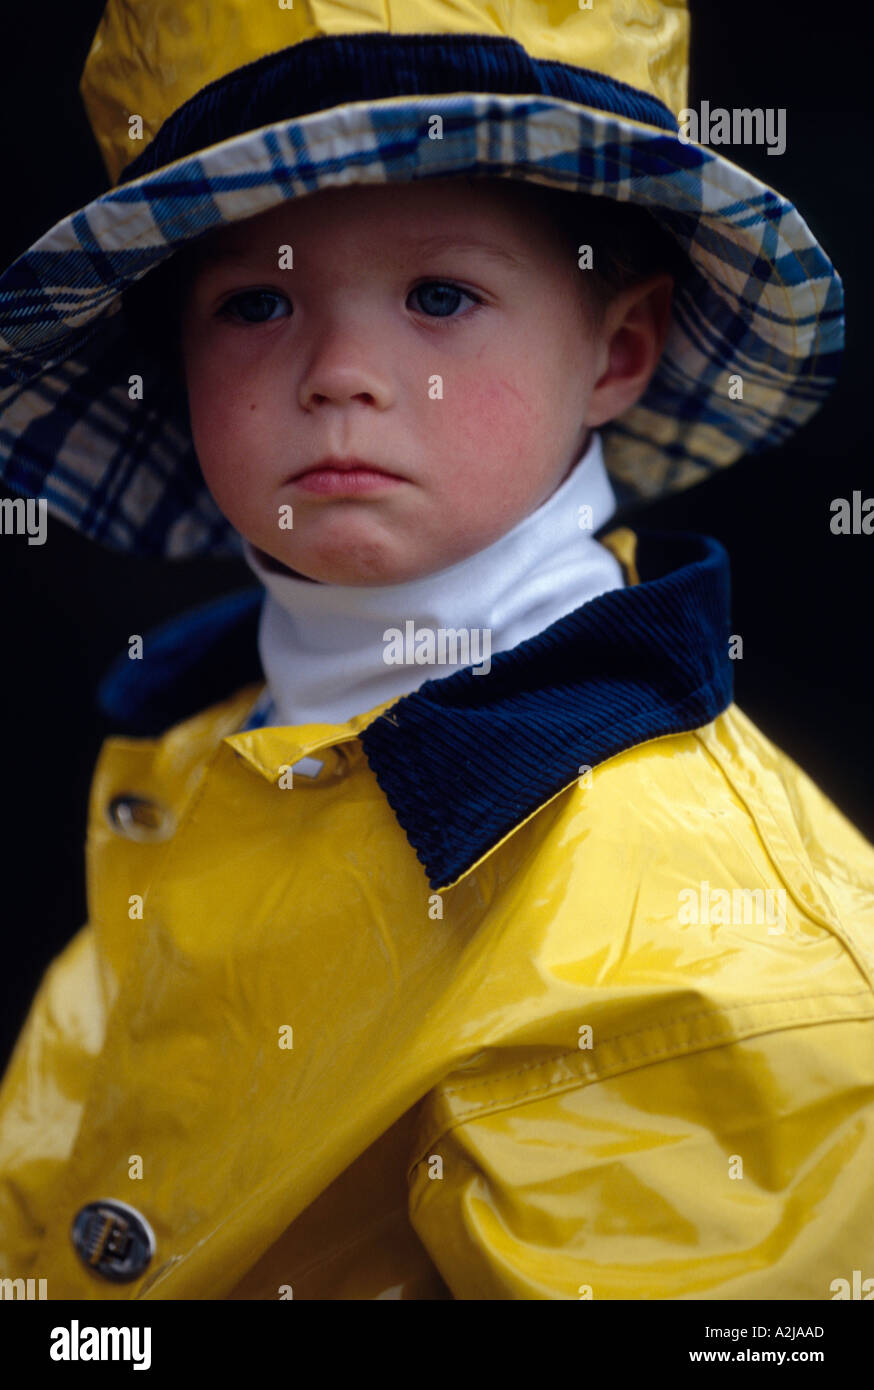 Portrait of a serious child wearing a yellow rain hat and matching slicker  Stock Photo - Alamy